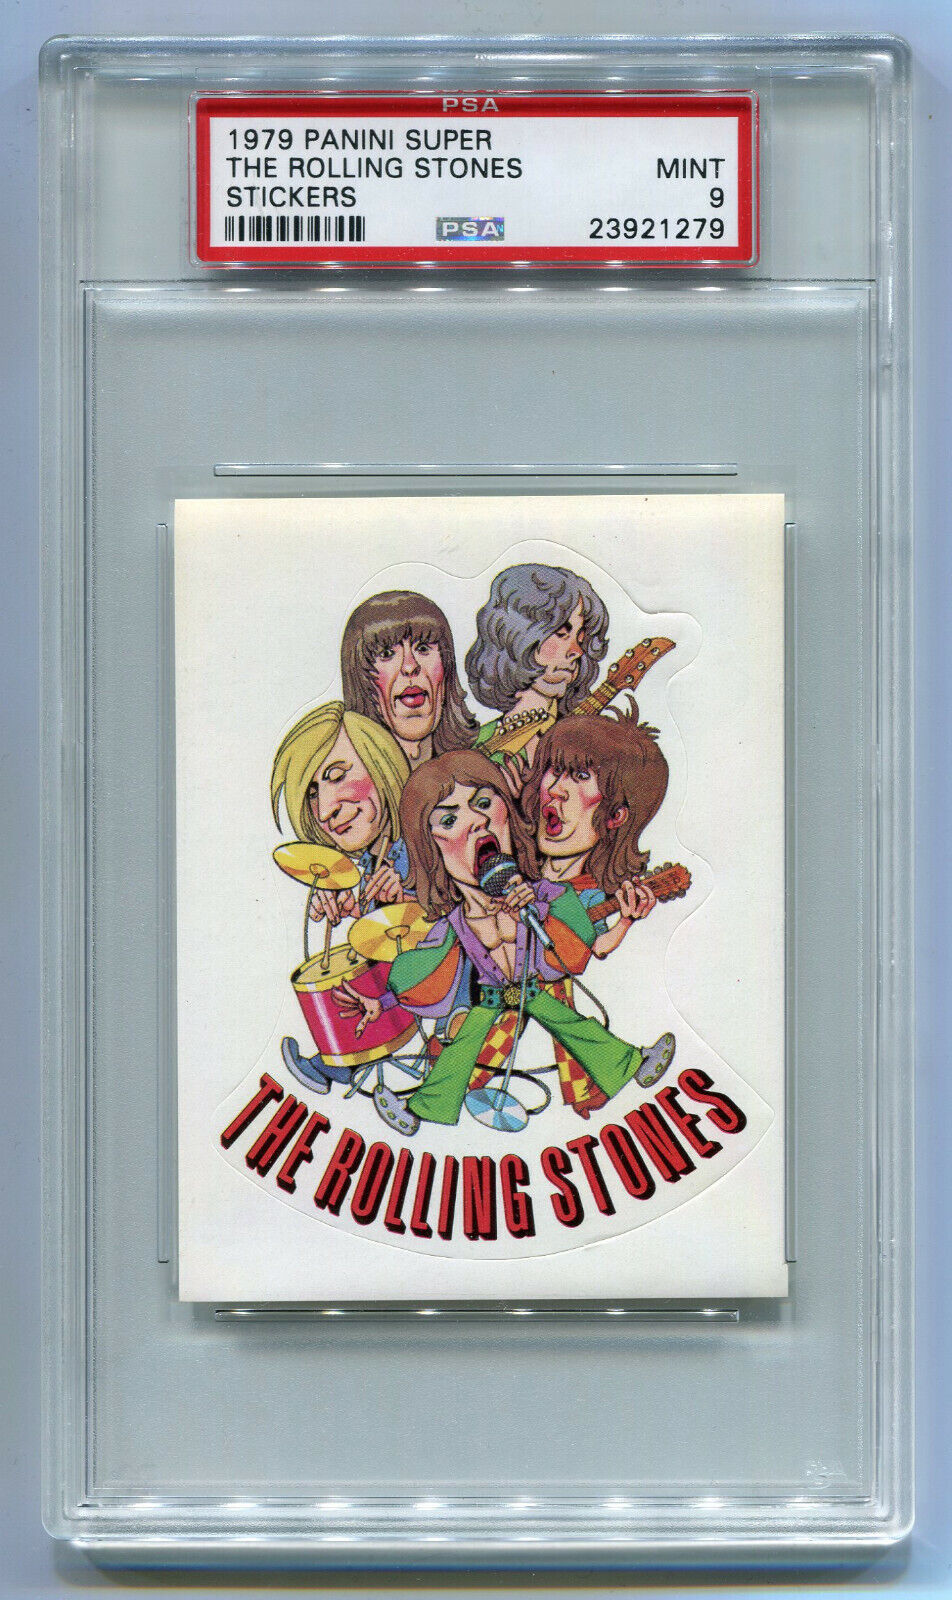 1979 1980 Panini Super Stickers The Rolling Stones vintage music card PSA 9 Mint